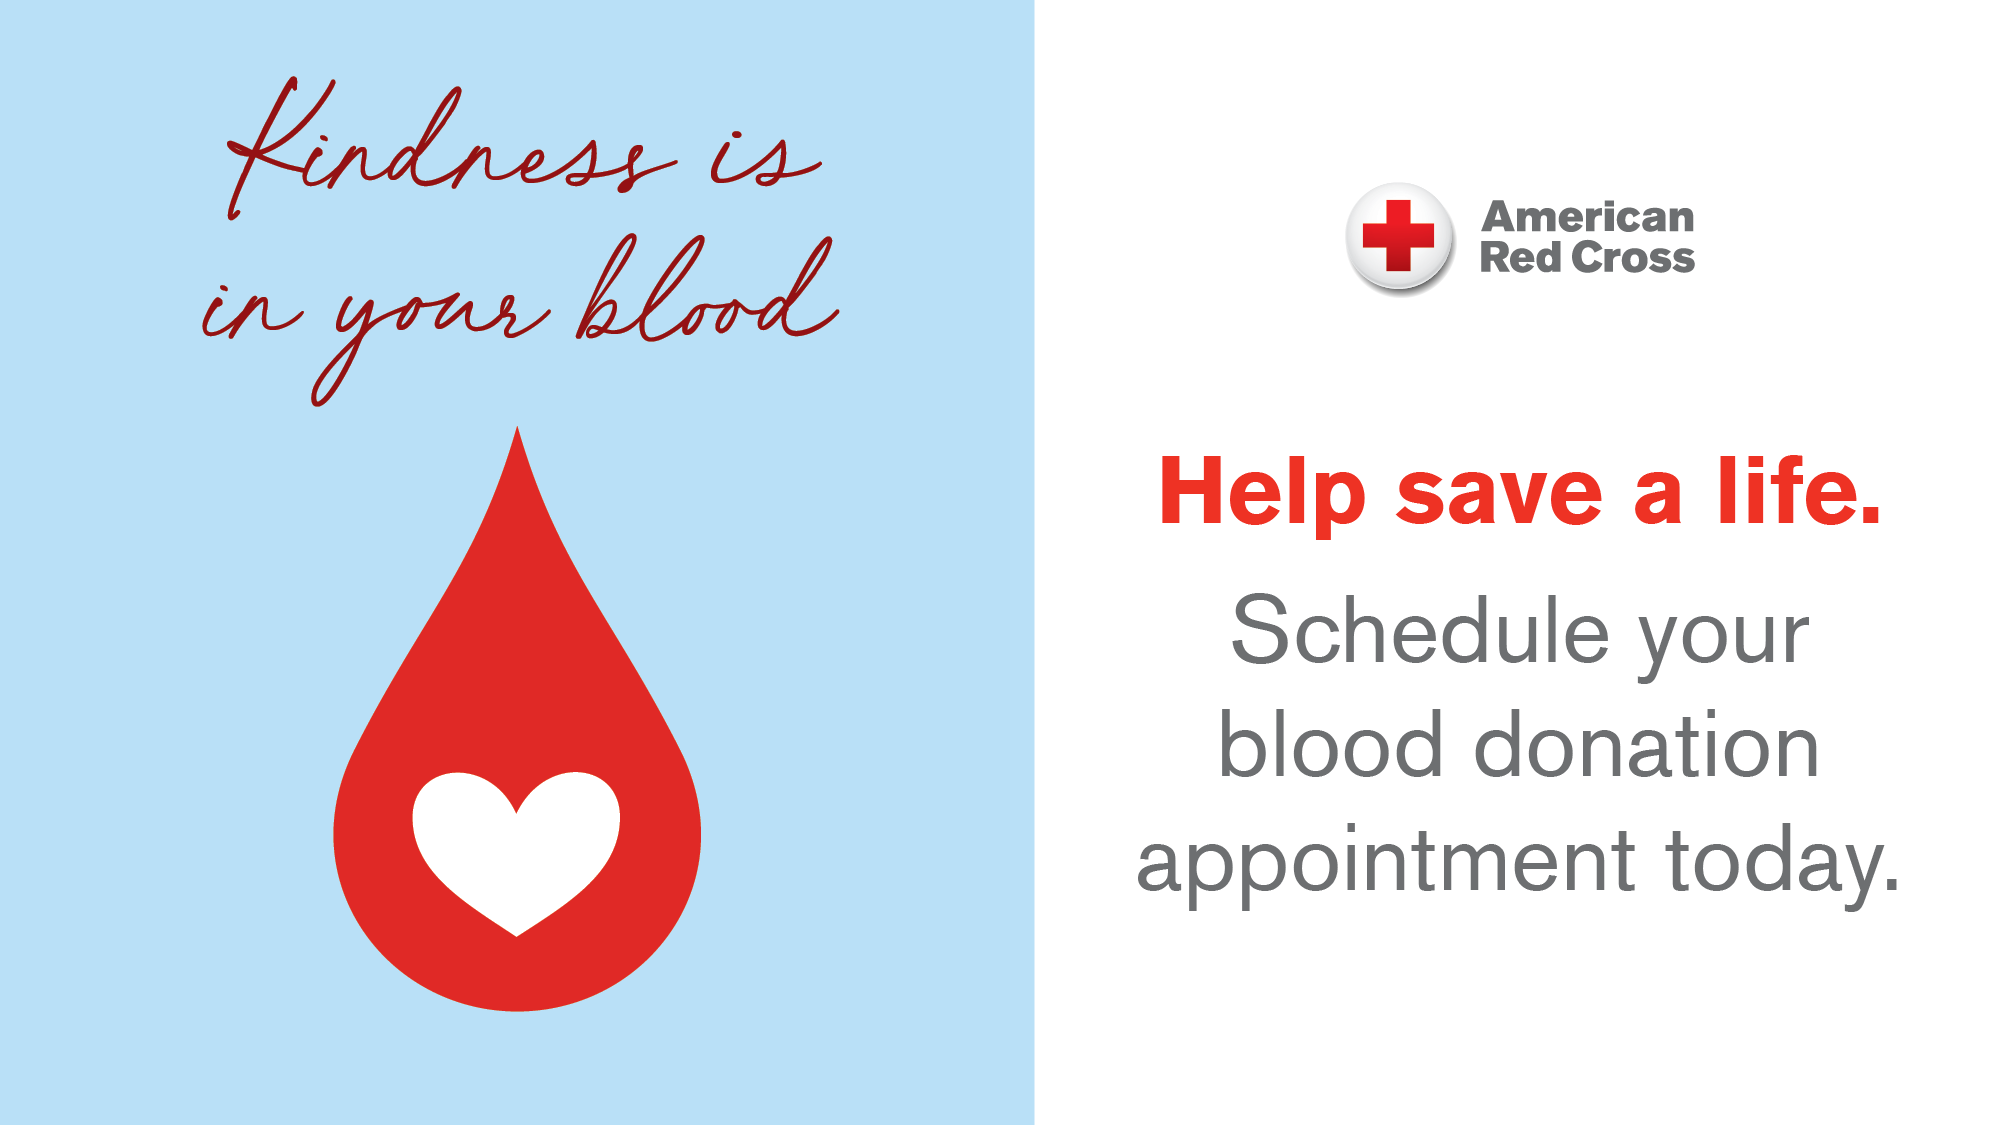 Kindness is in your blood. Help save a life by donating blood today. 